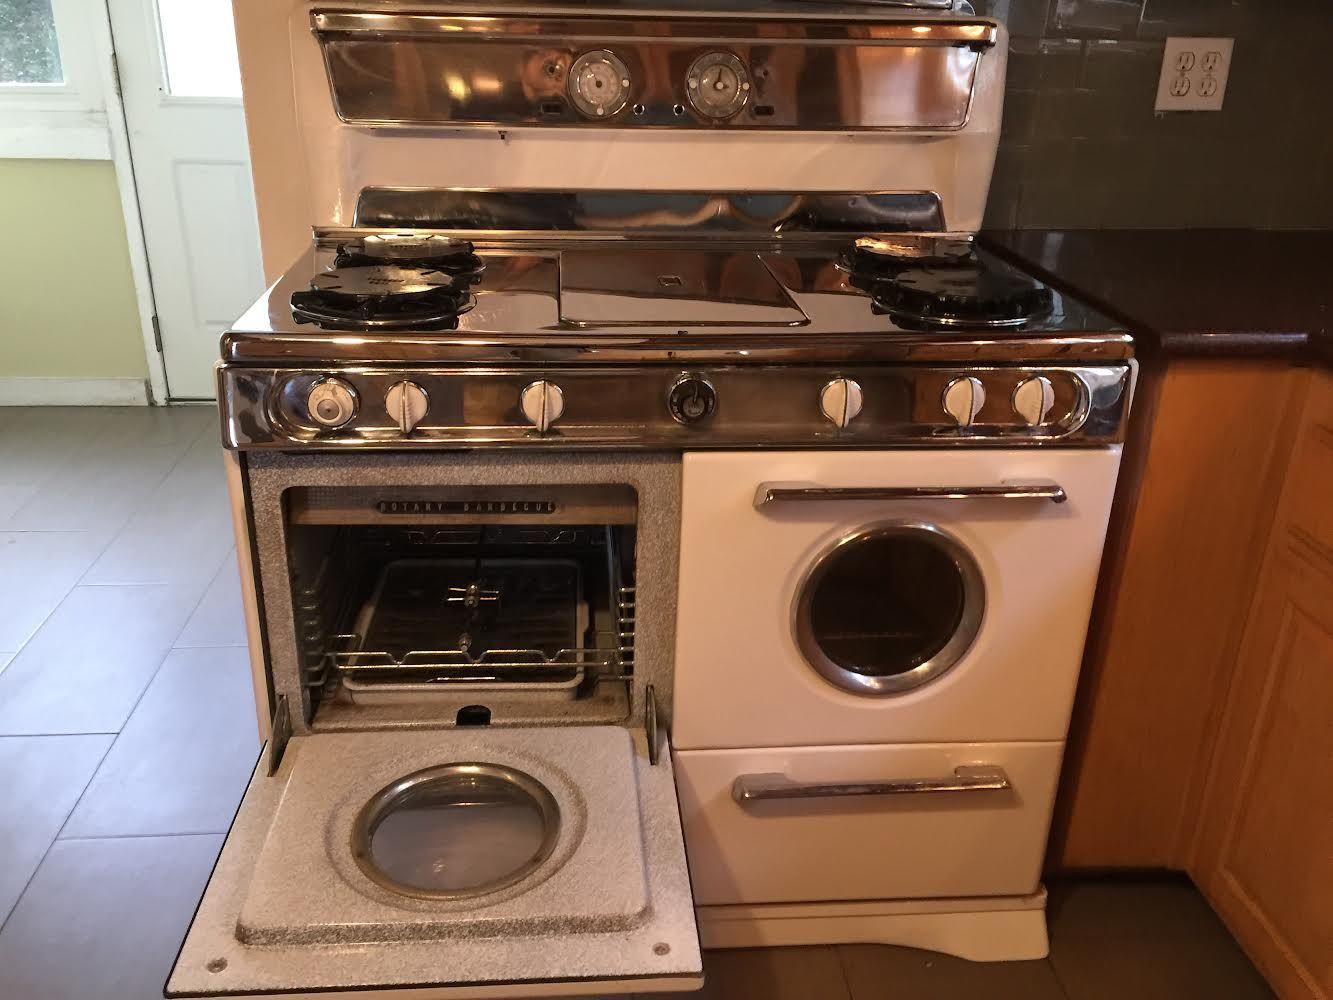 Classic/Vintage Western Holly Oven/Stove